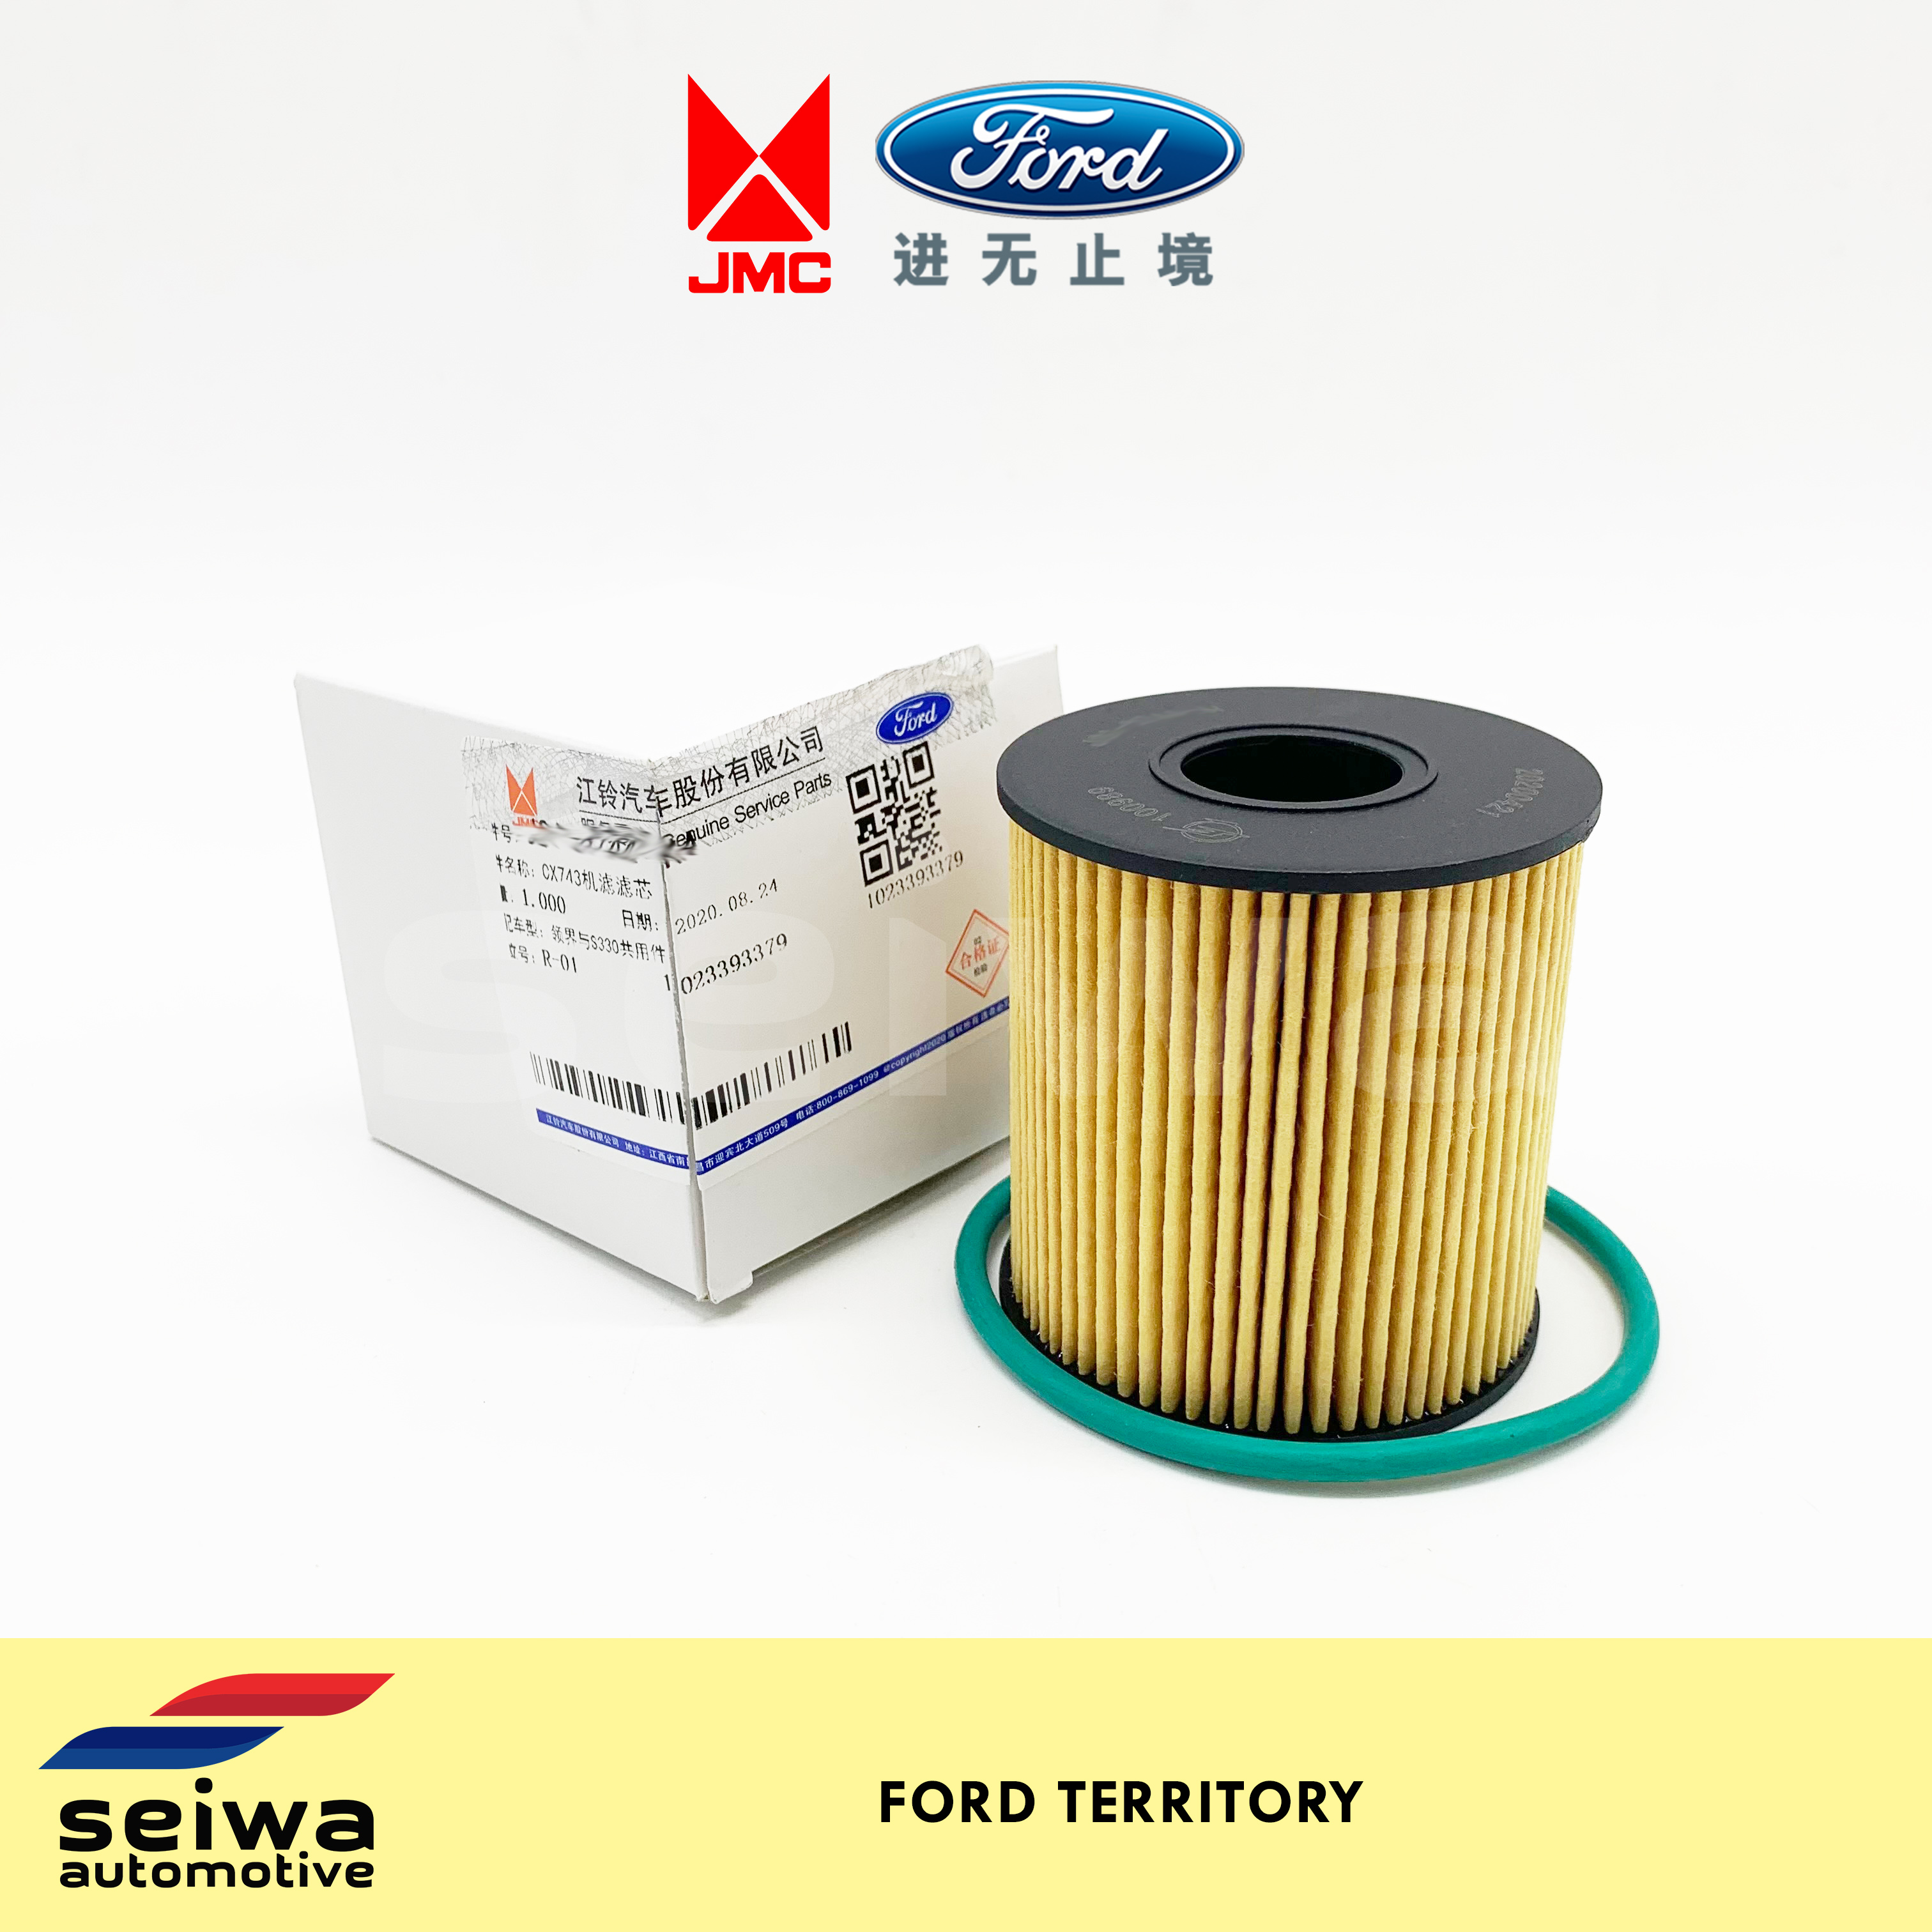 Ford Territory Oil Filter Genuine JMCFord Auto Parts review and price